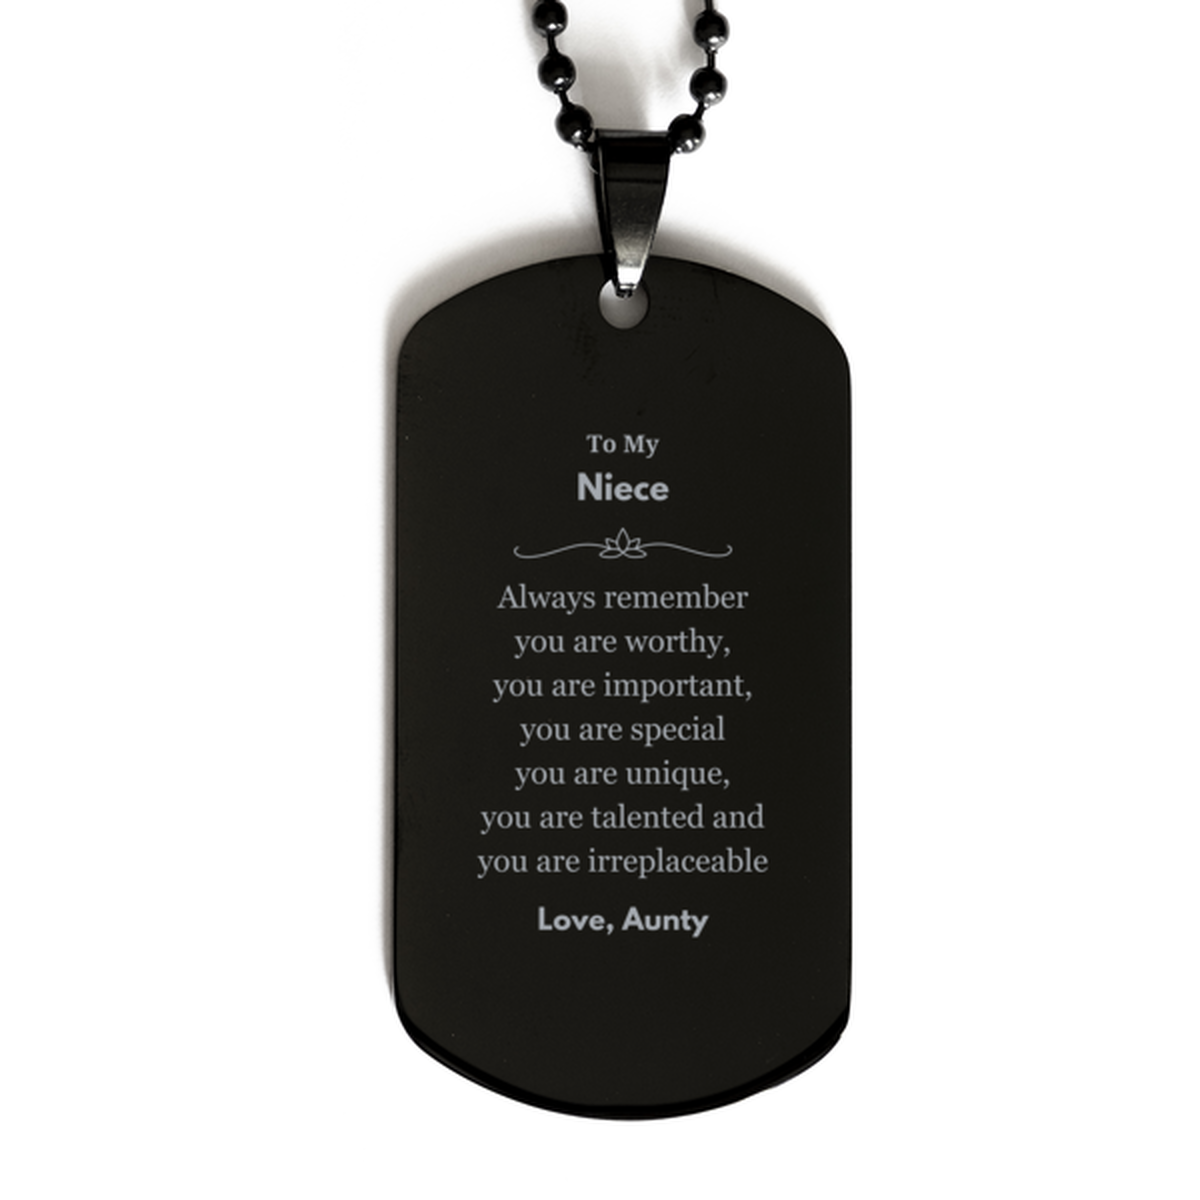 Niece Birthday Gifts from Aunty, Inspirational Black Dog Tag for Niece Christmas Graduation Gifts for Niece Always remember you are worthy, you are important. Love, Aunty